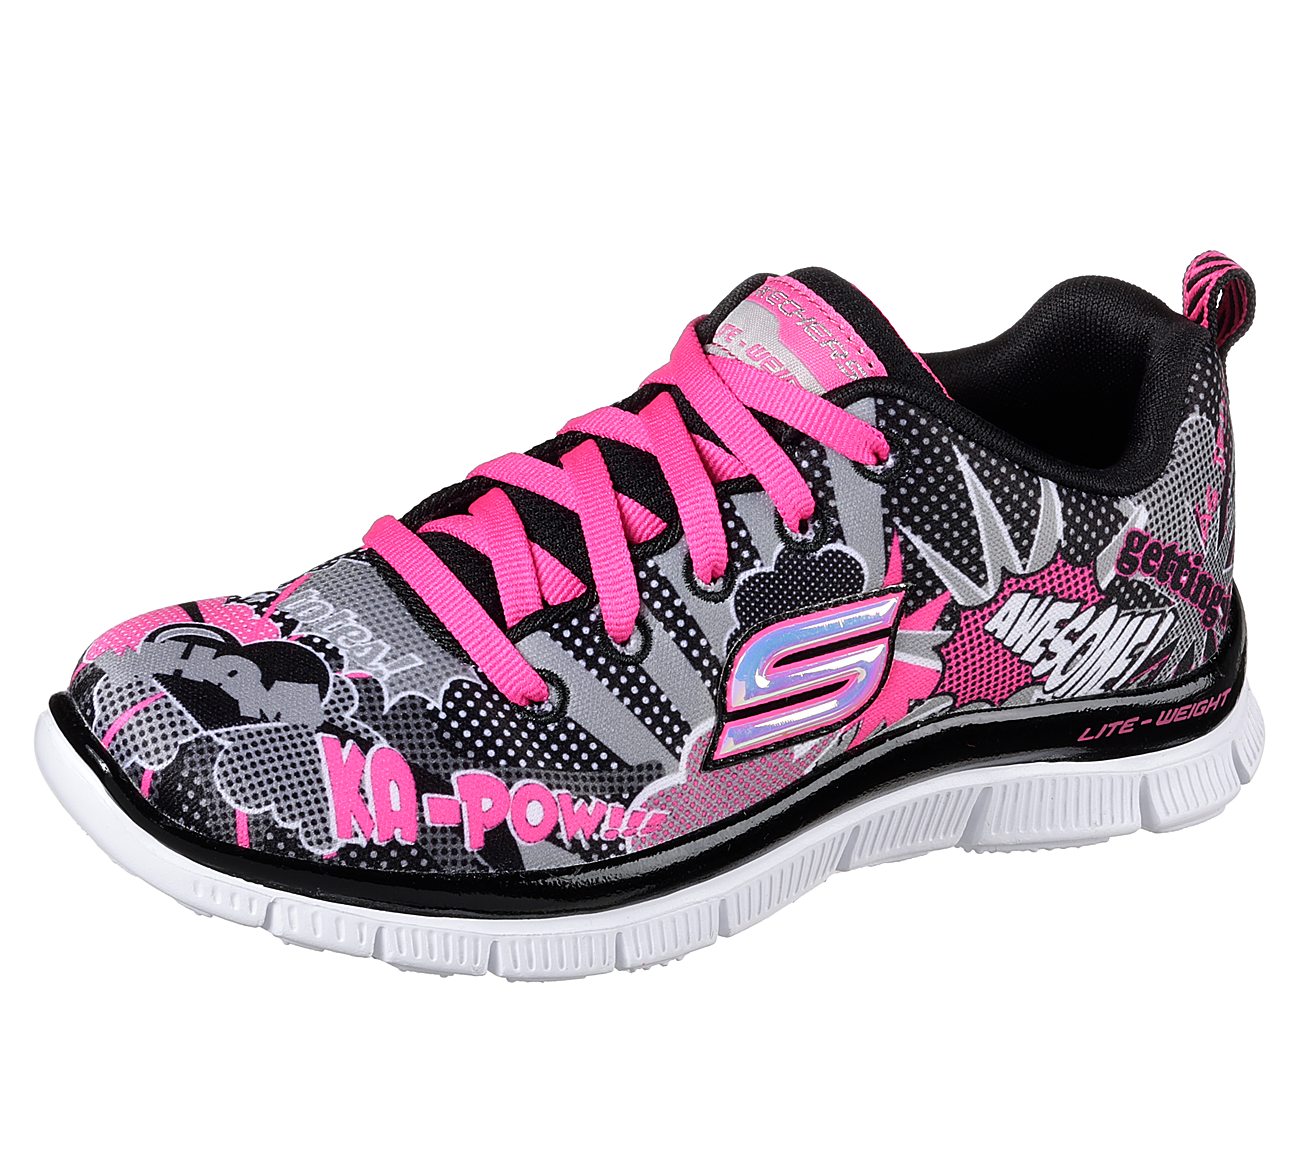 black and pink skechers